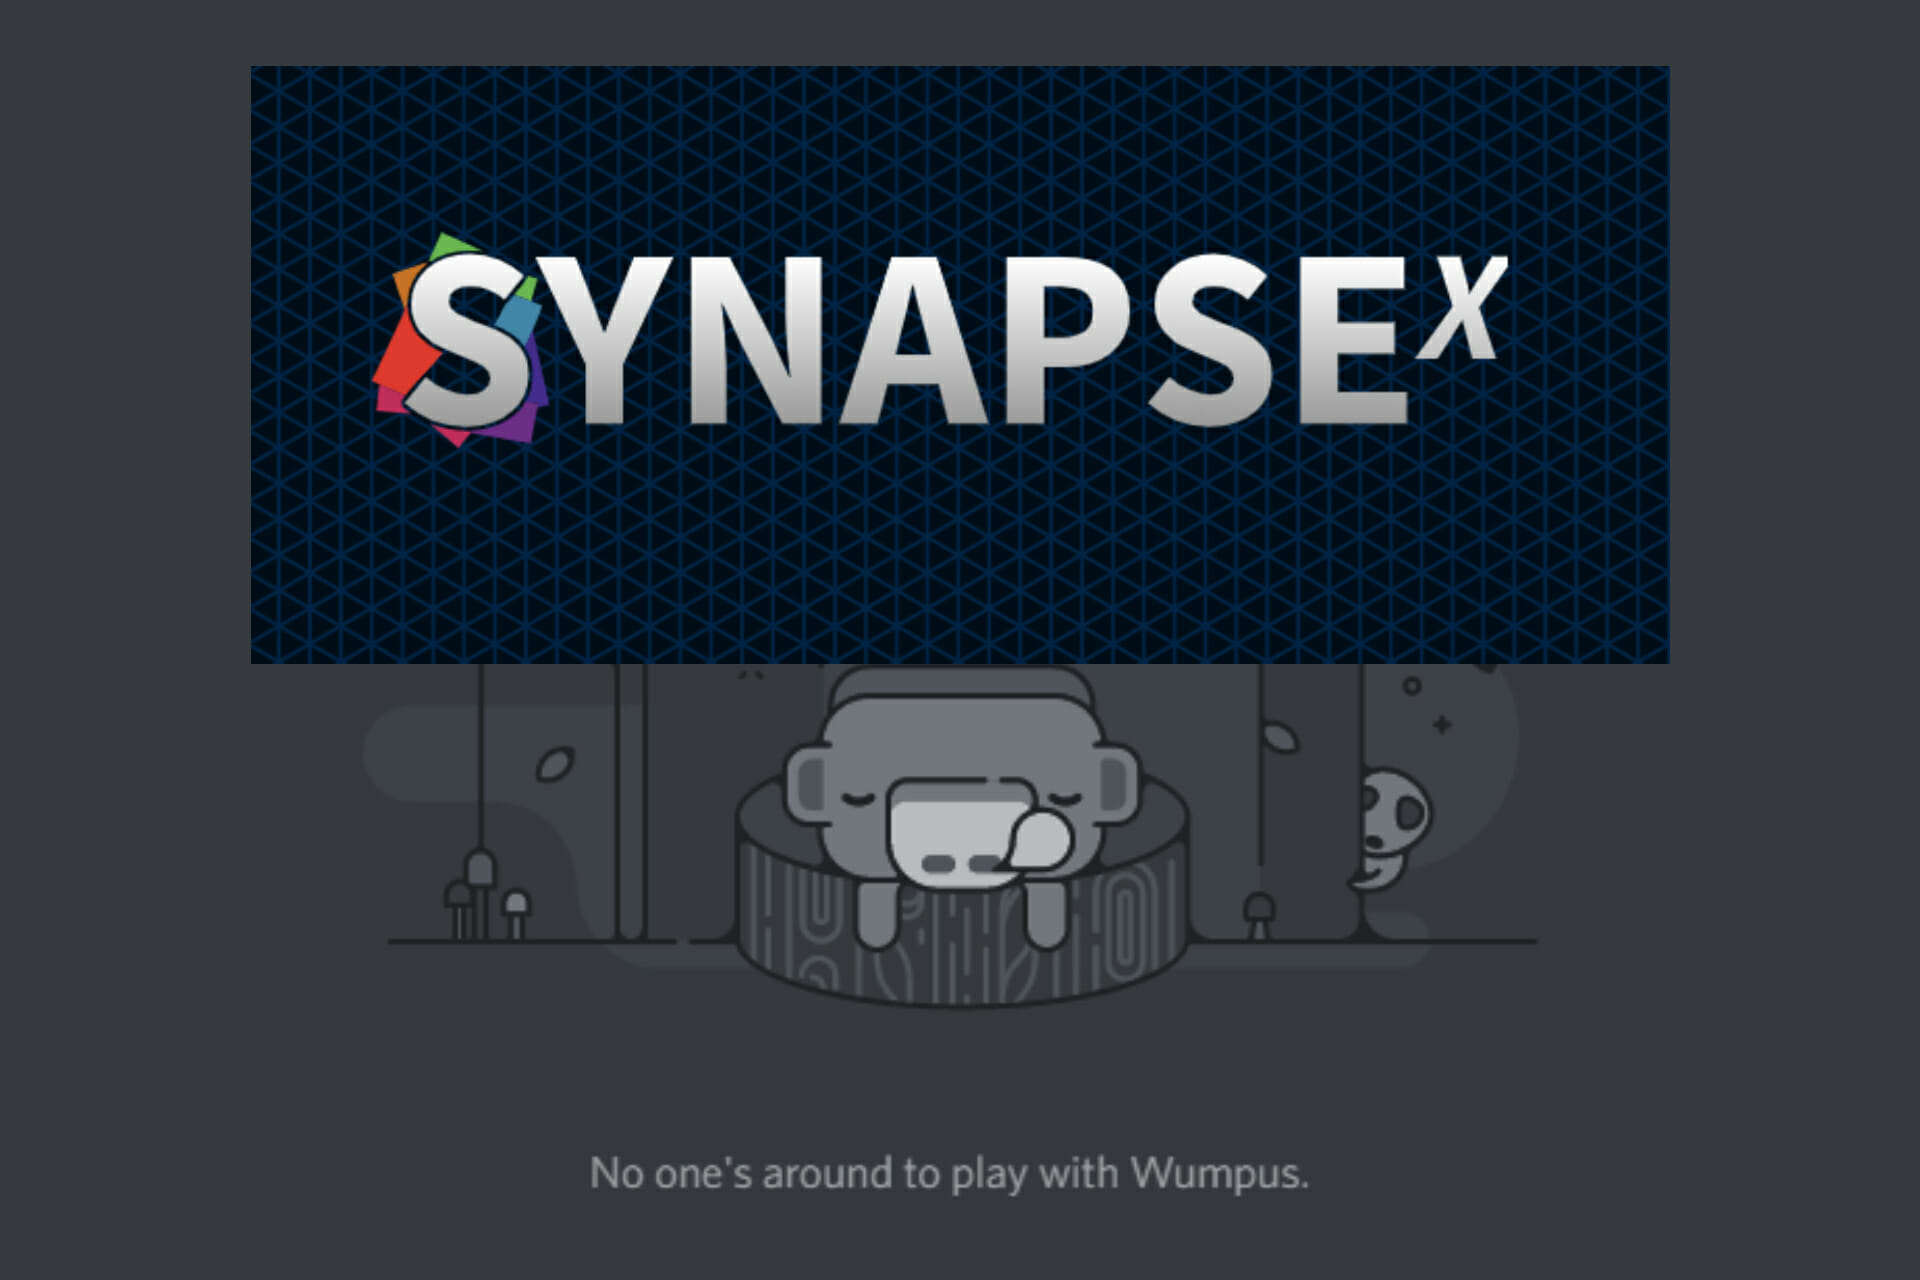 Synapse X Discord Server [Updated Invite Link 2023] - DSL